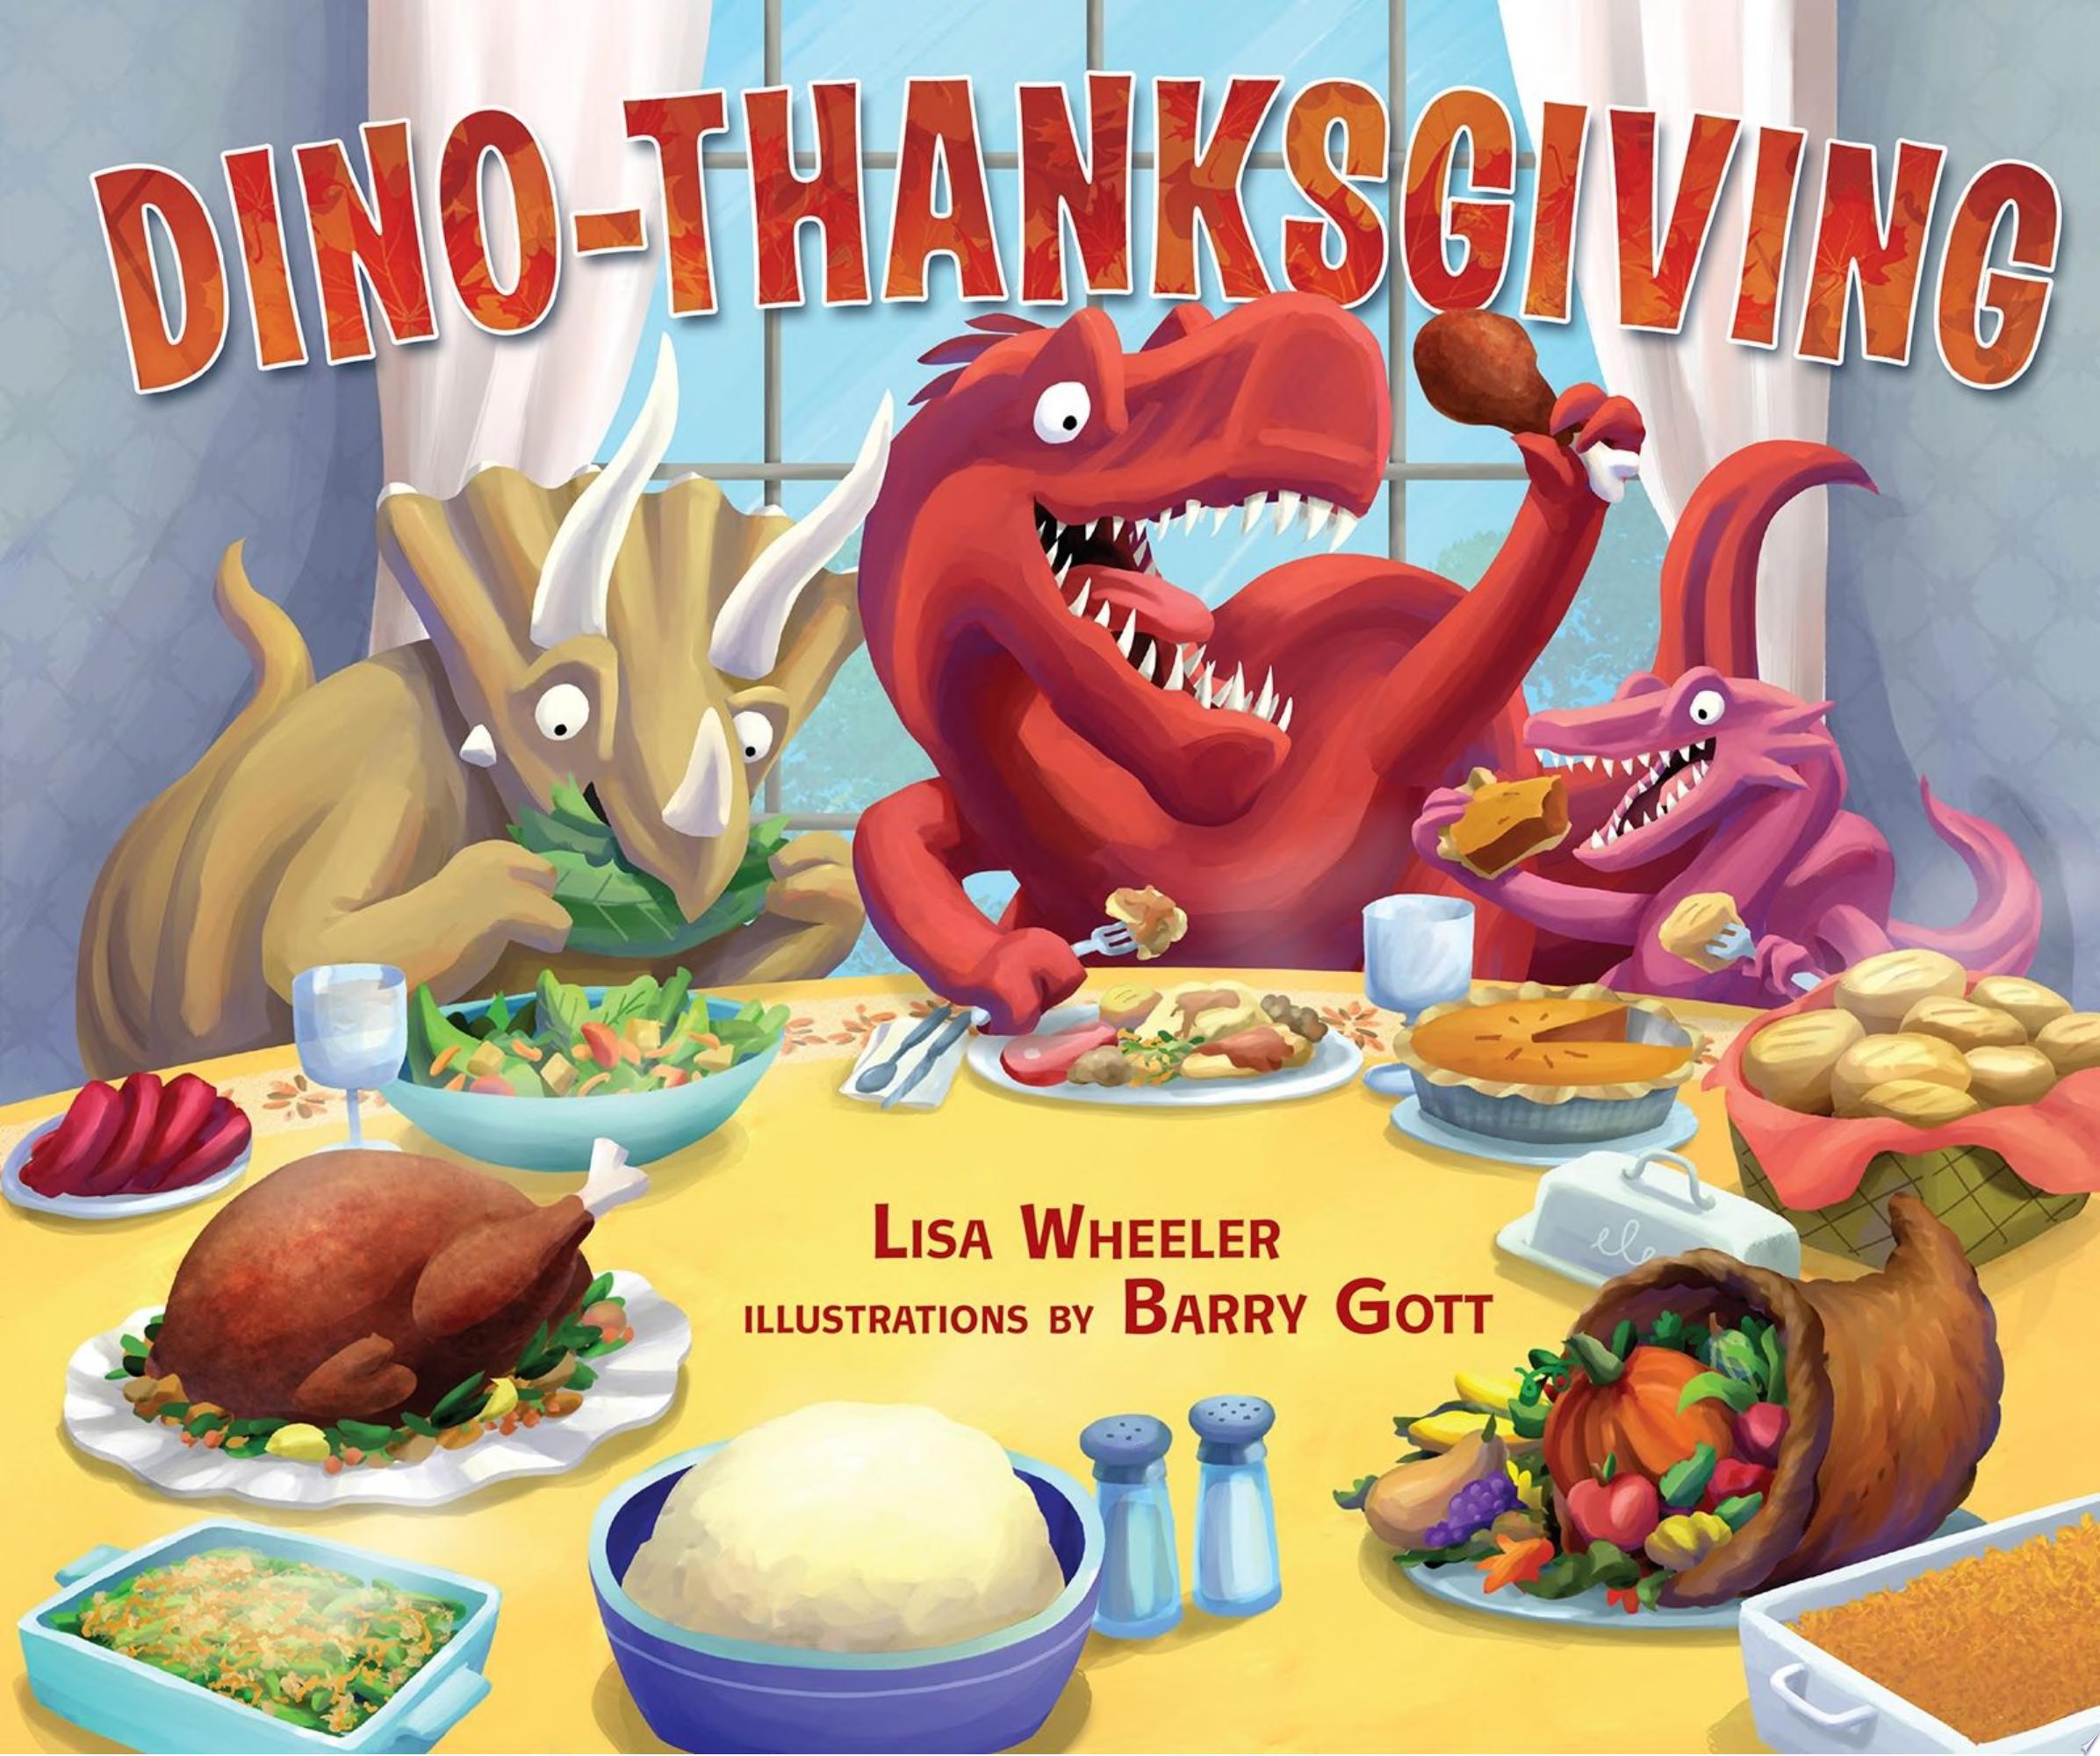 Image for "Dino-Thanksgiving"